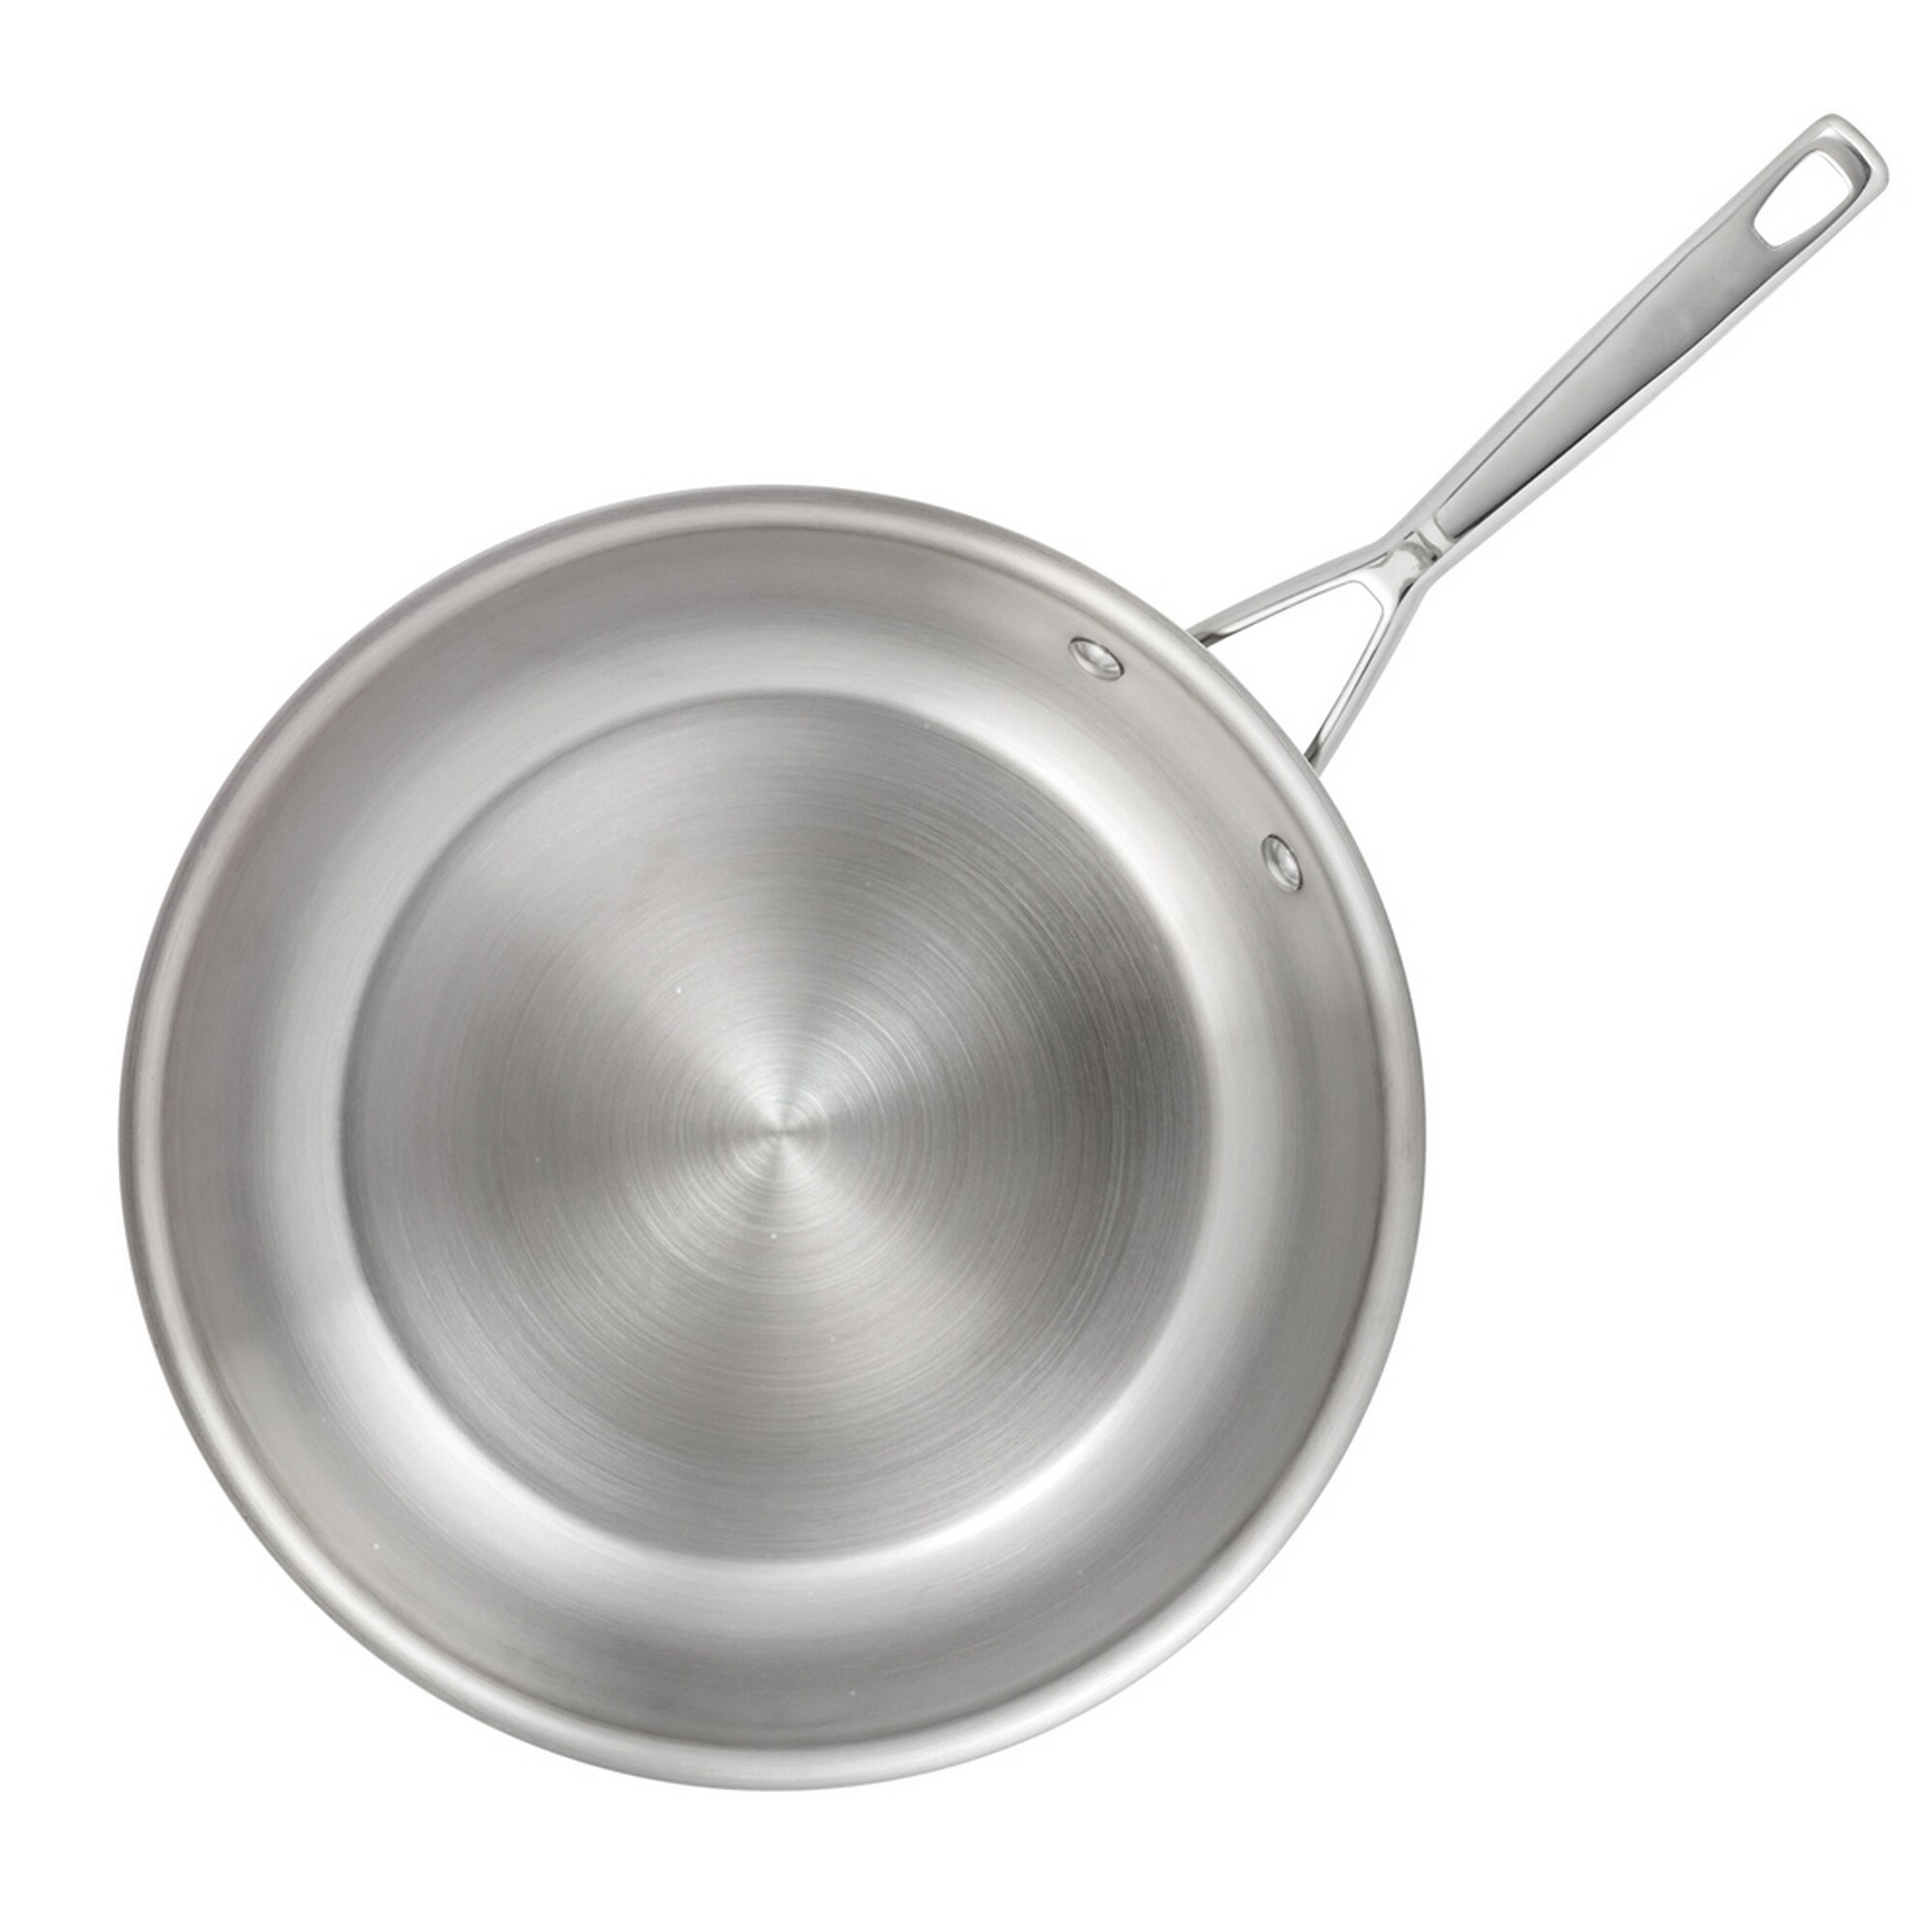 https://ak1.ostkcdn.com/images/products/9206669/Anolon-Tri-Ply-Clad-Stainless-Steel-12-piece-Cookware-Set-68f6f815-e0c0-407c-aee2-9a5688f5175e.jpg